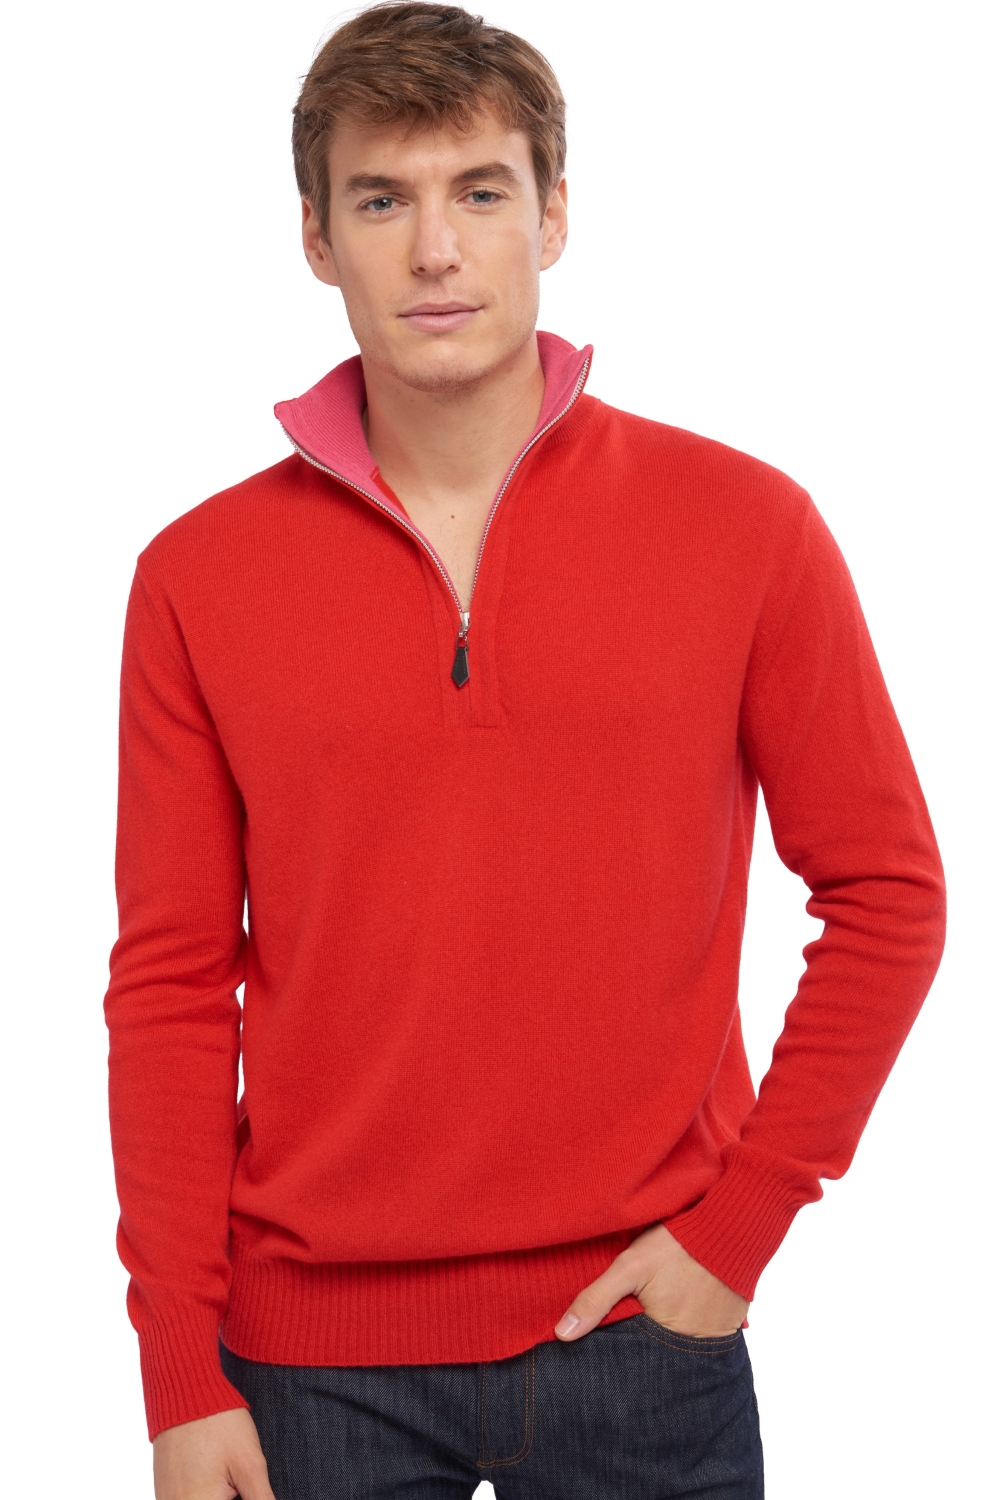 Cashmere men polo style sweaters henri rouge shocking pink 2xl